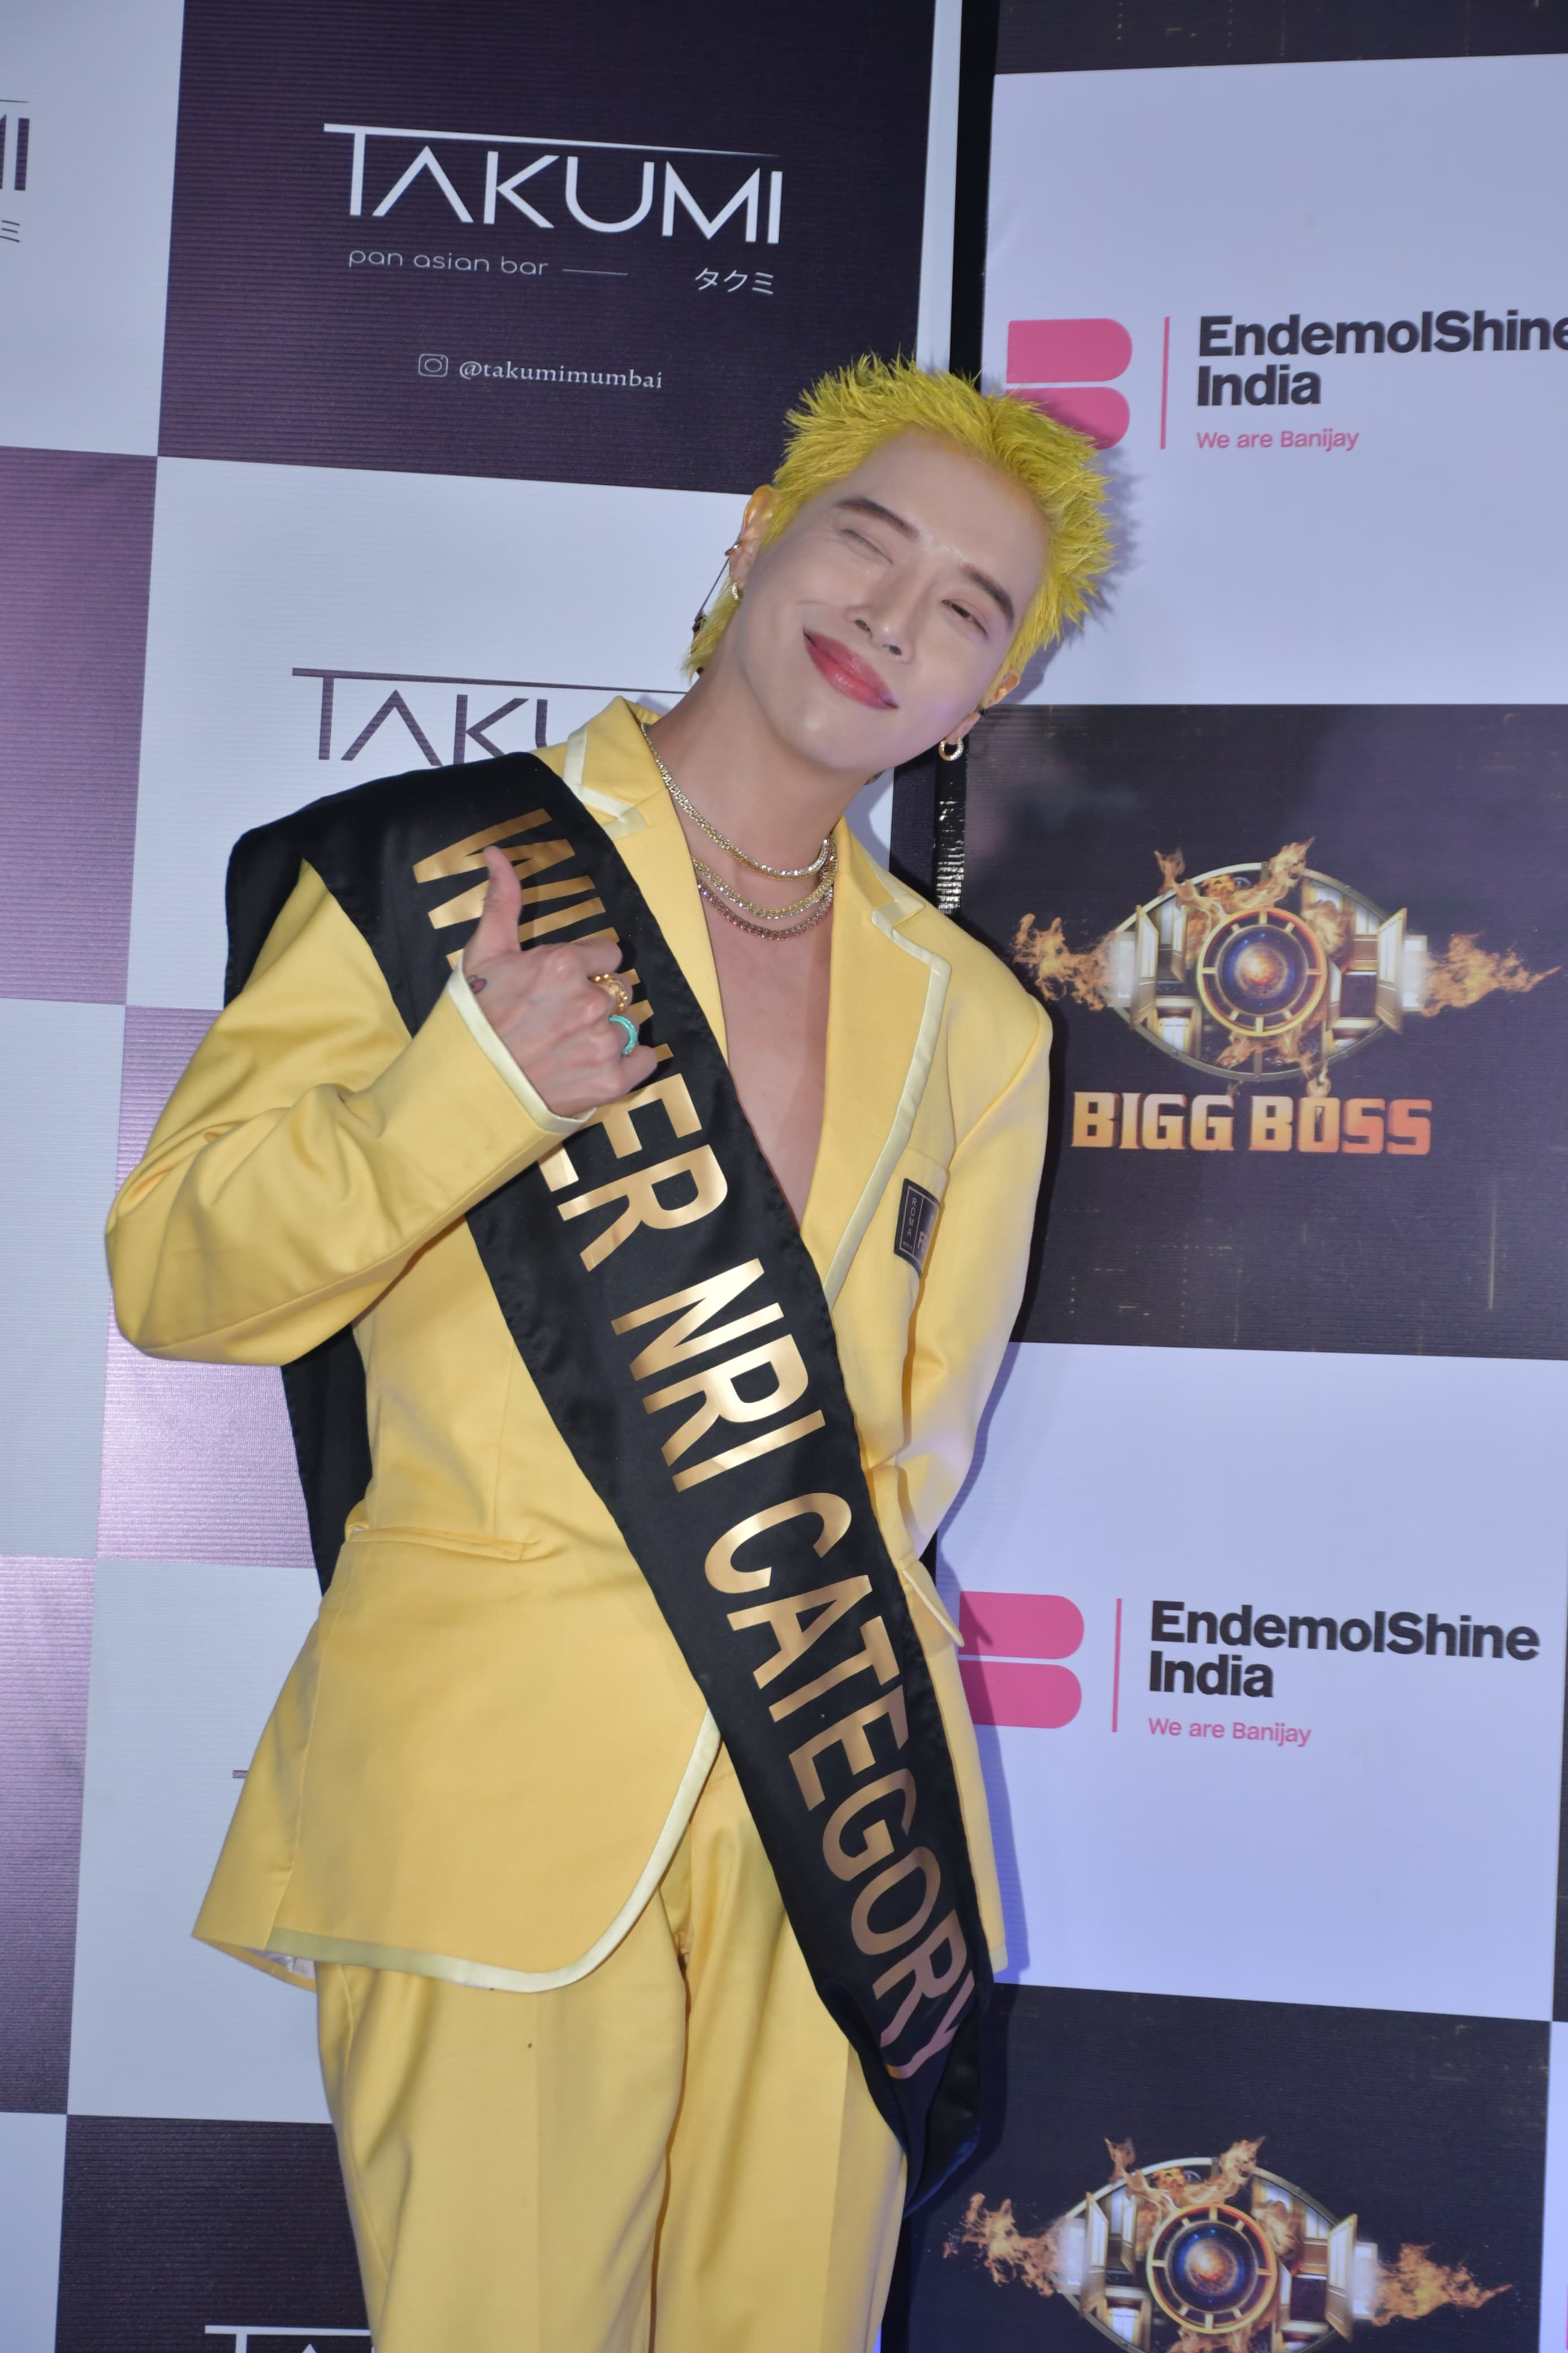 Korean singer Aoora donned an elegant yellow pant suit and also wore a funny sash which had 'Winner NRI Category' written on it